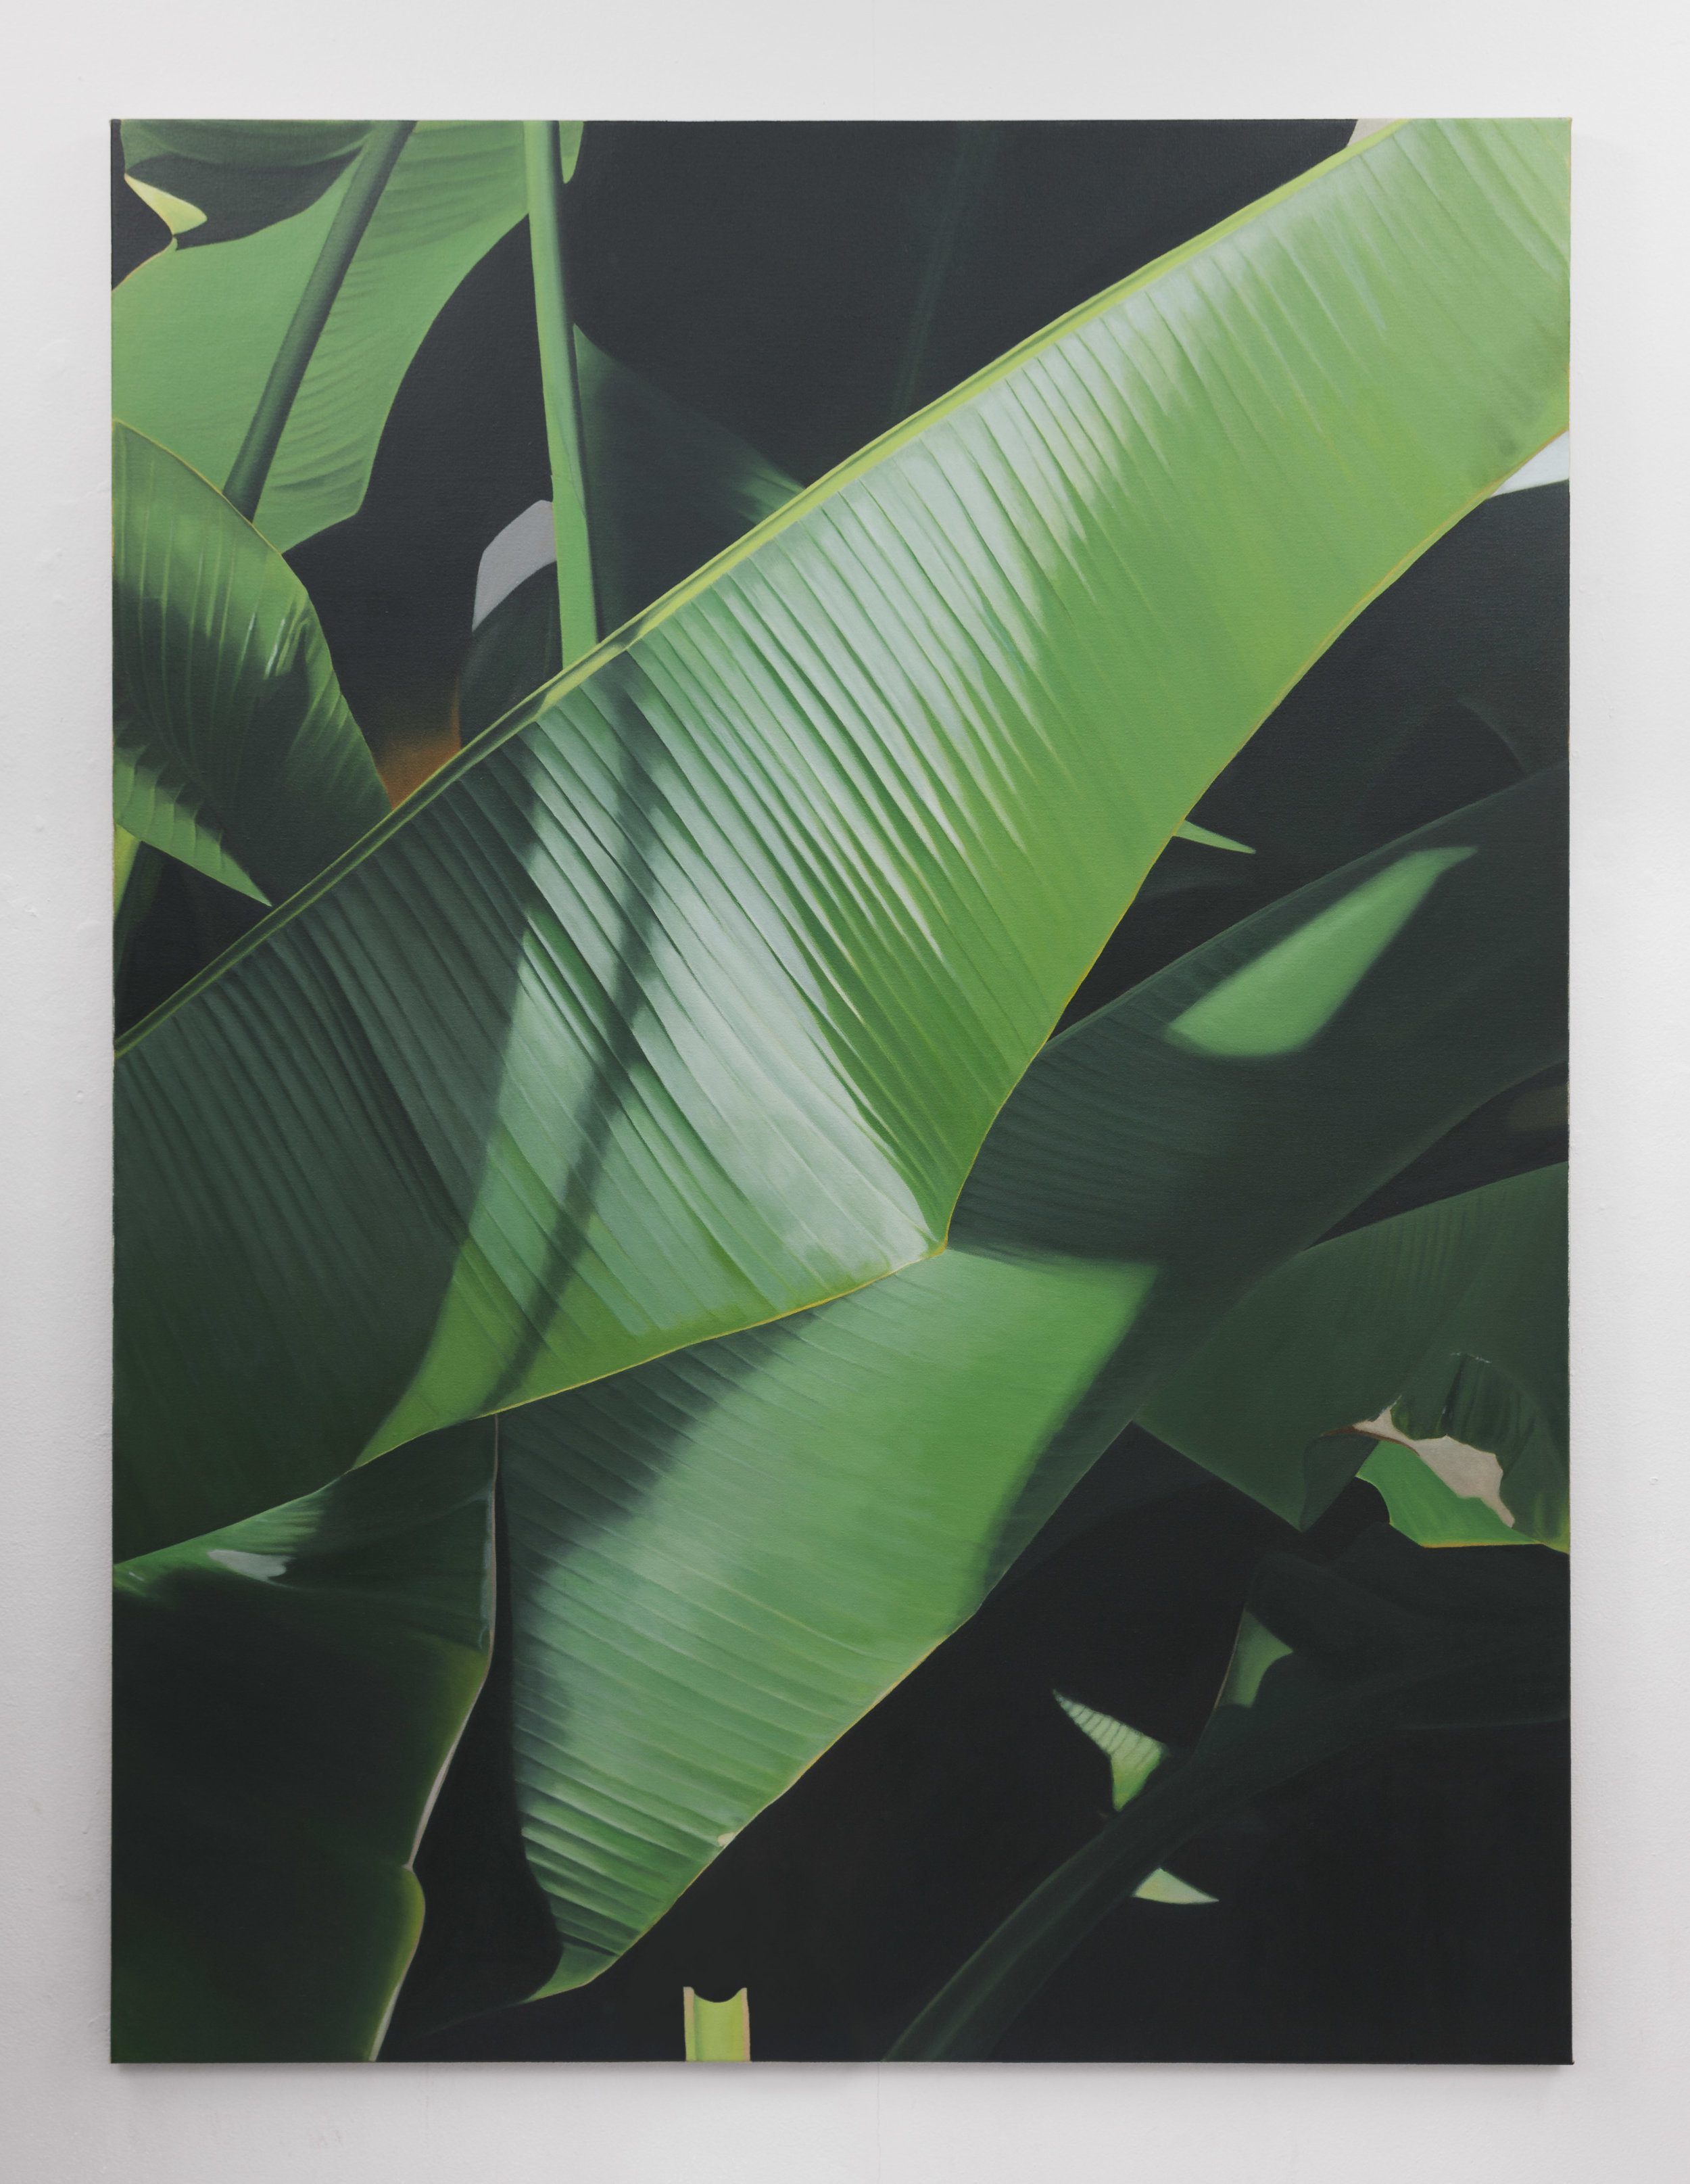  Banana I | 2019 | Oil on linen | 160 x 120 cm | Private Collection | Photo by Lee Welch | Shortlisted The RHA Hennessy Craig Award  